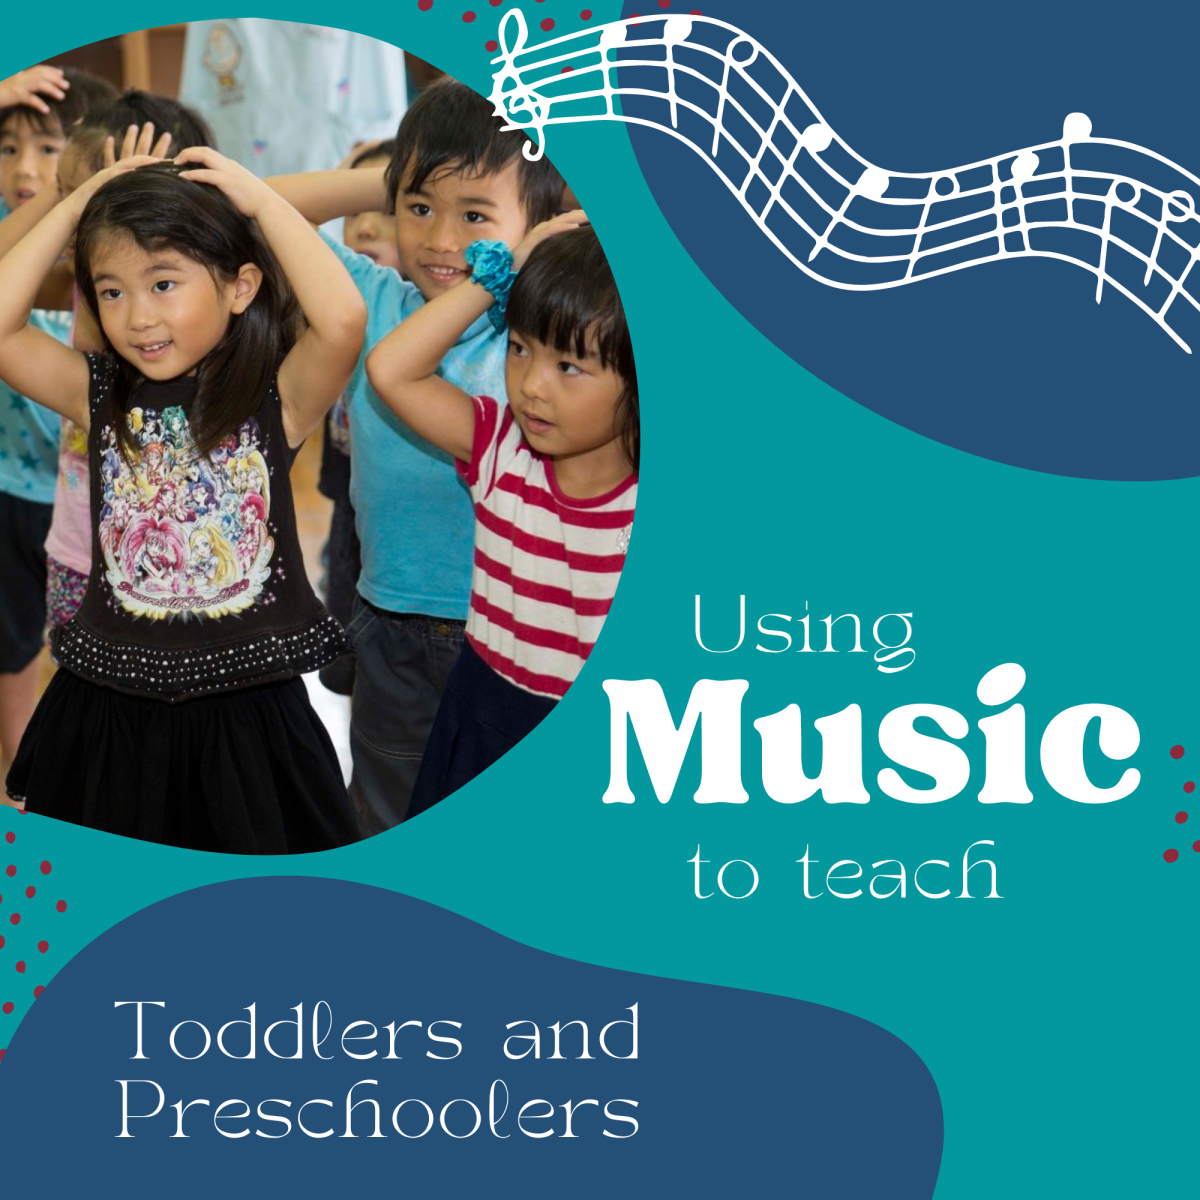 Using Music to Teach Toddlers and Preschoolers